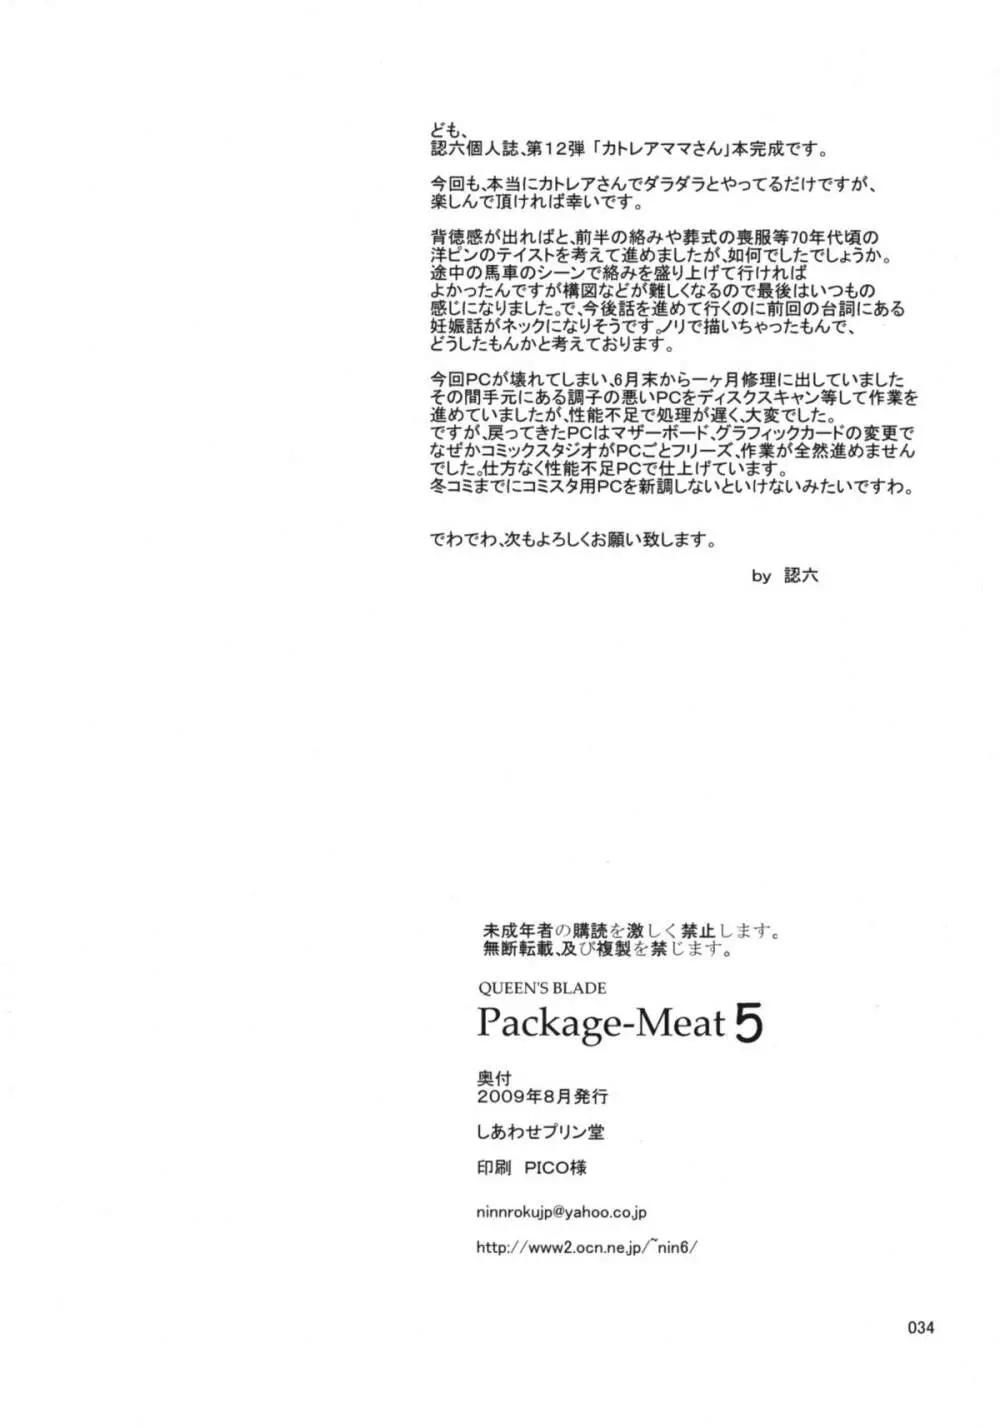 Package-Meat 5 33ページ